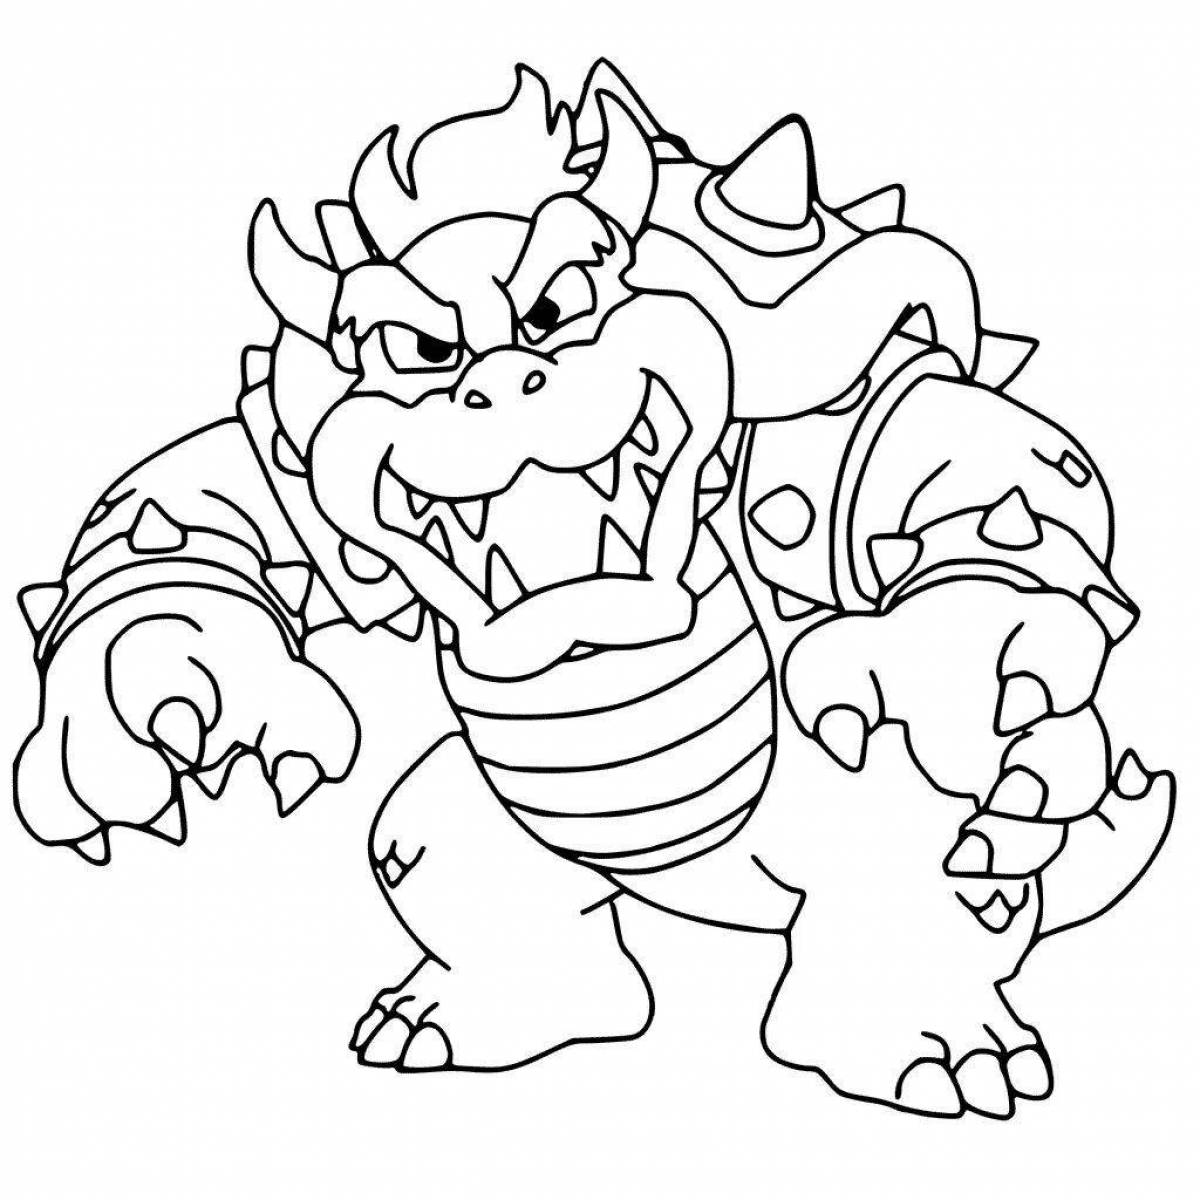 Charming bowser coloring book